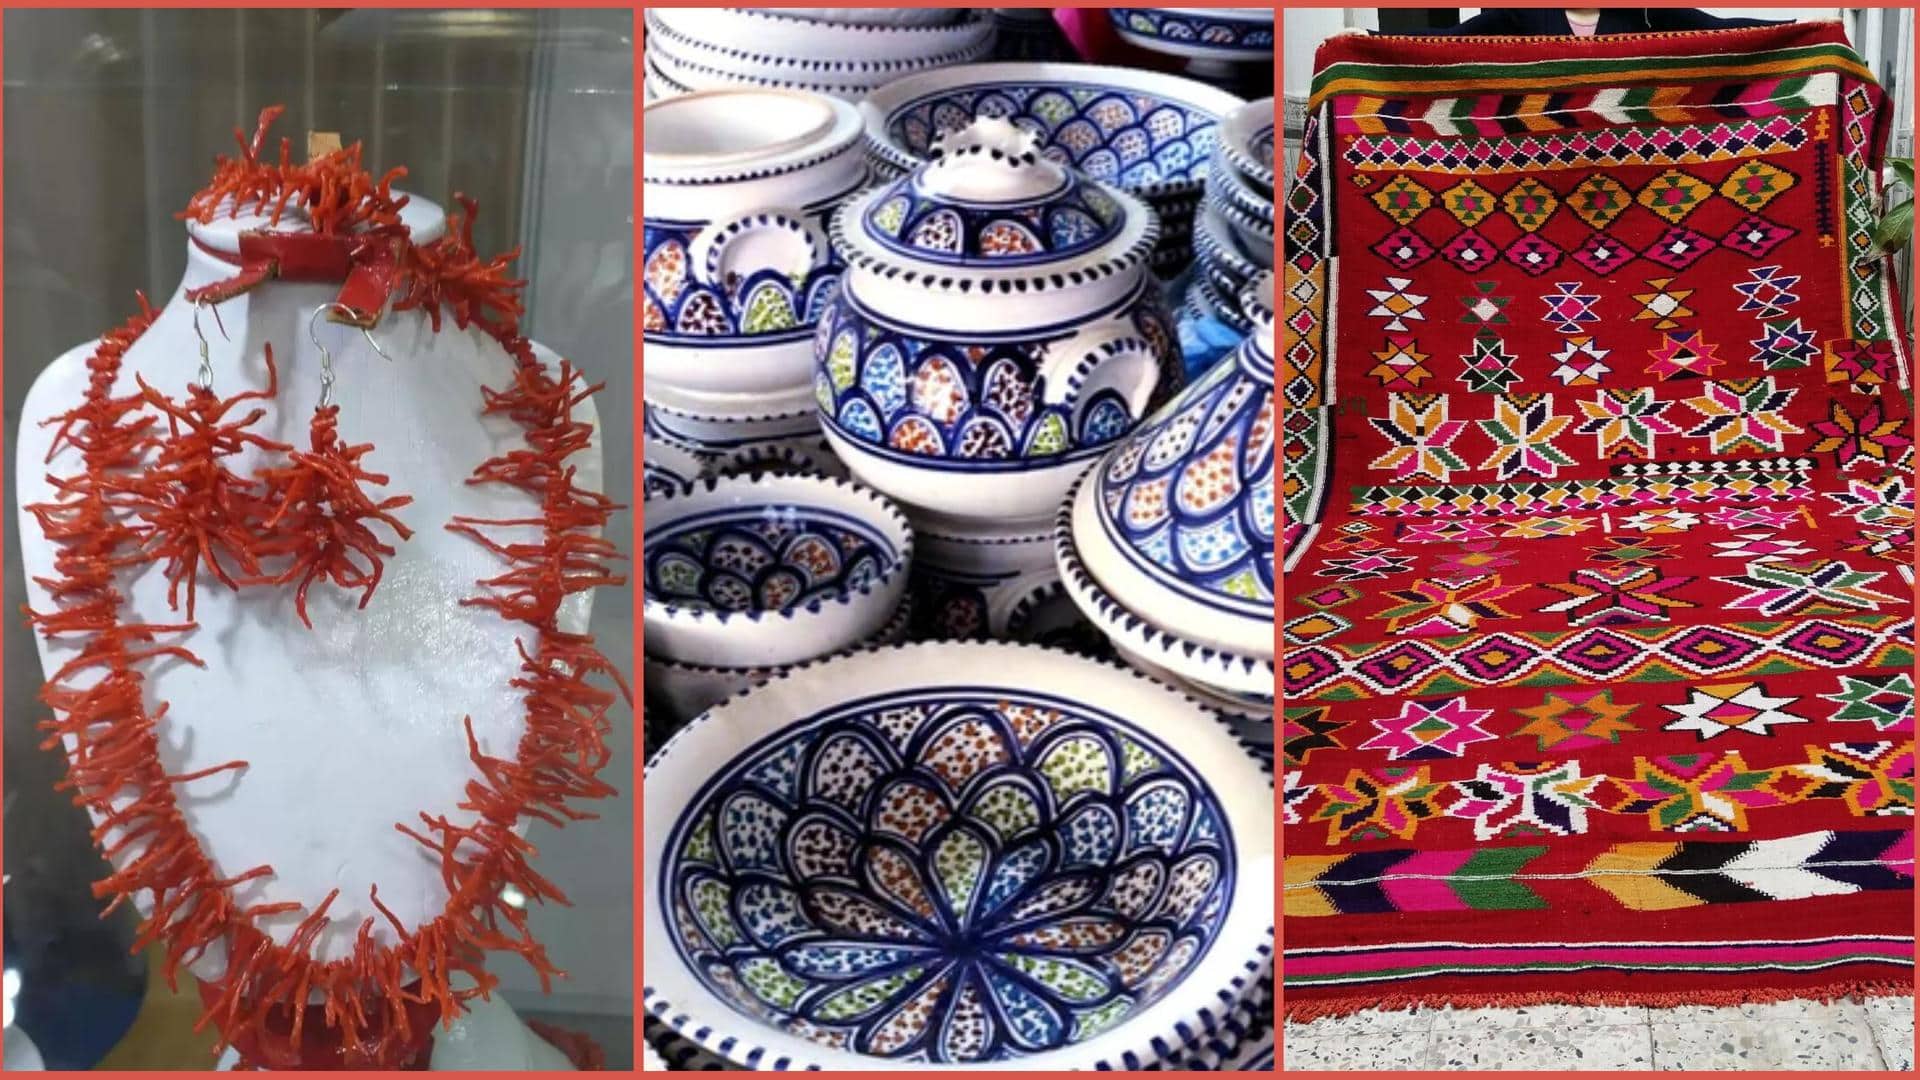 5 souvenirs to bring back home from your Algeria trip